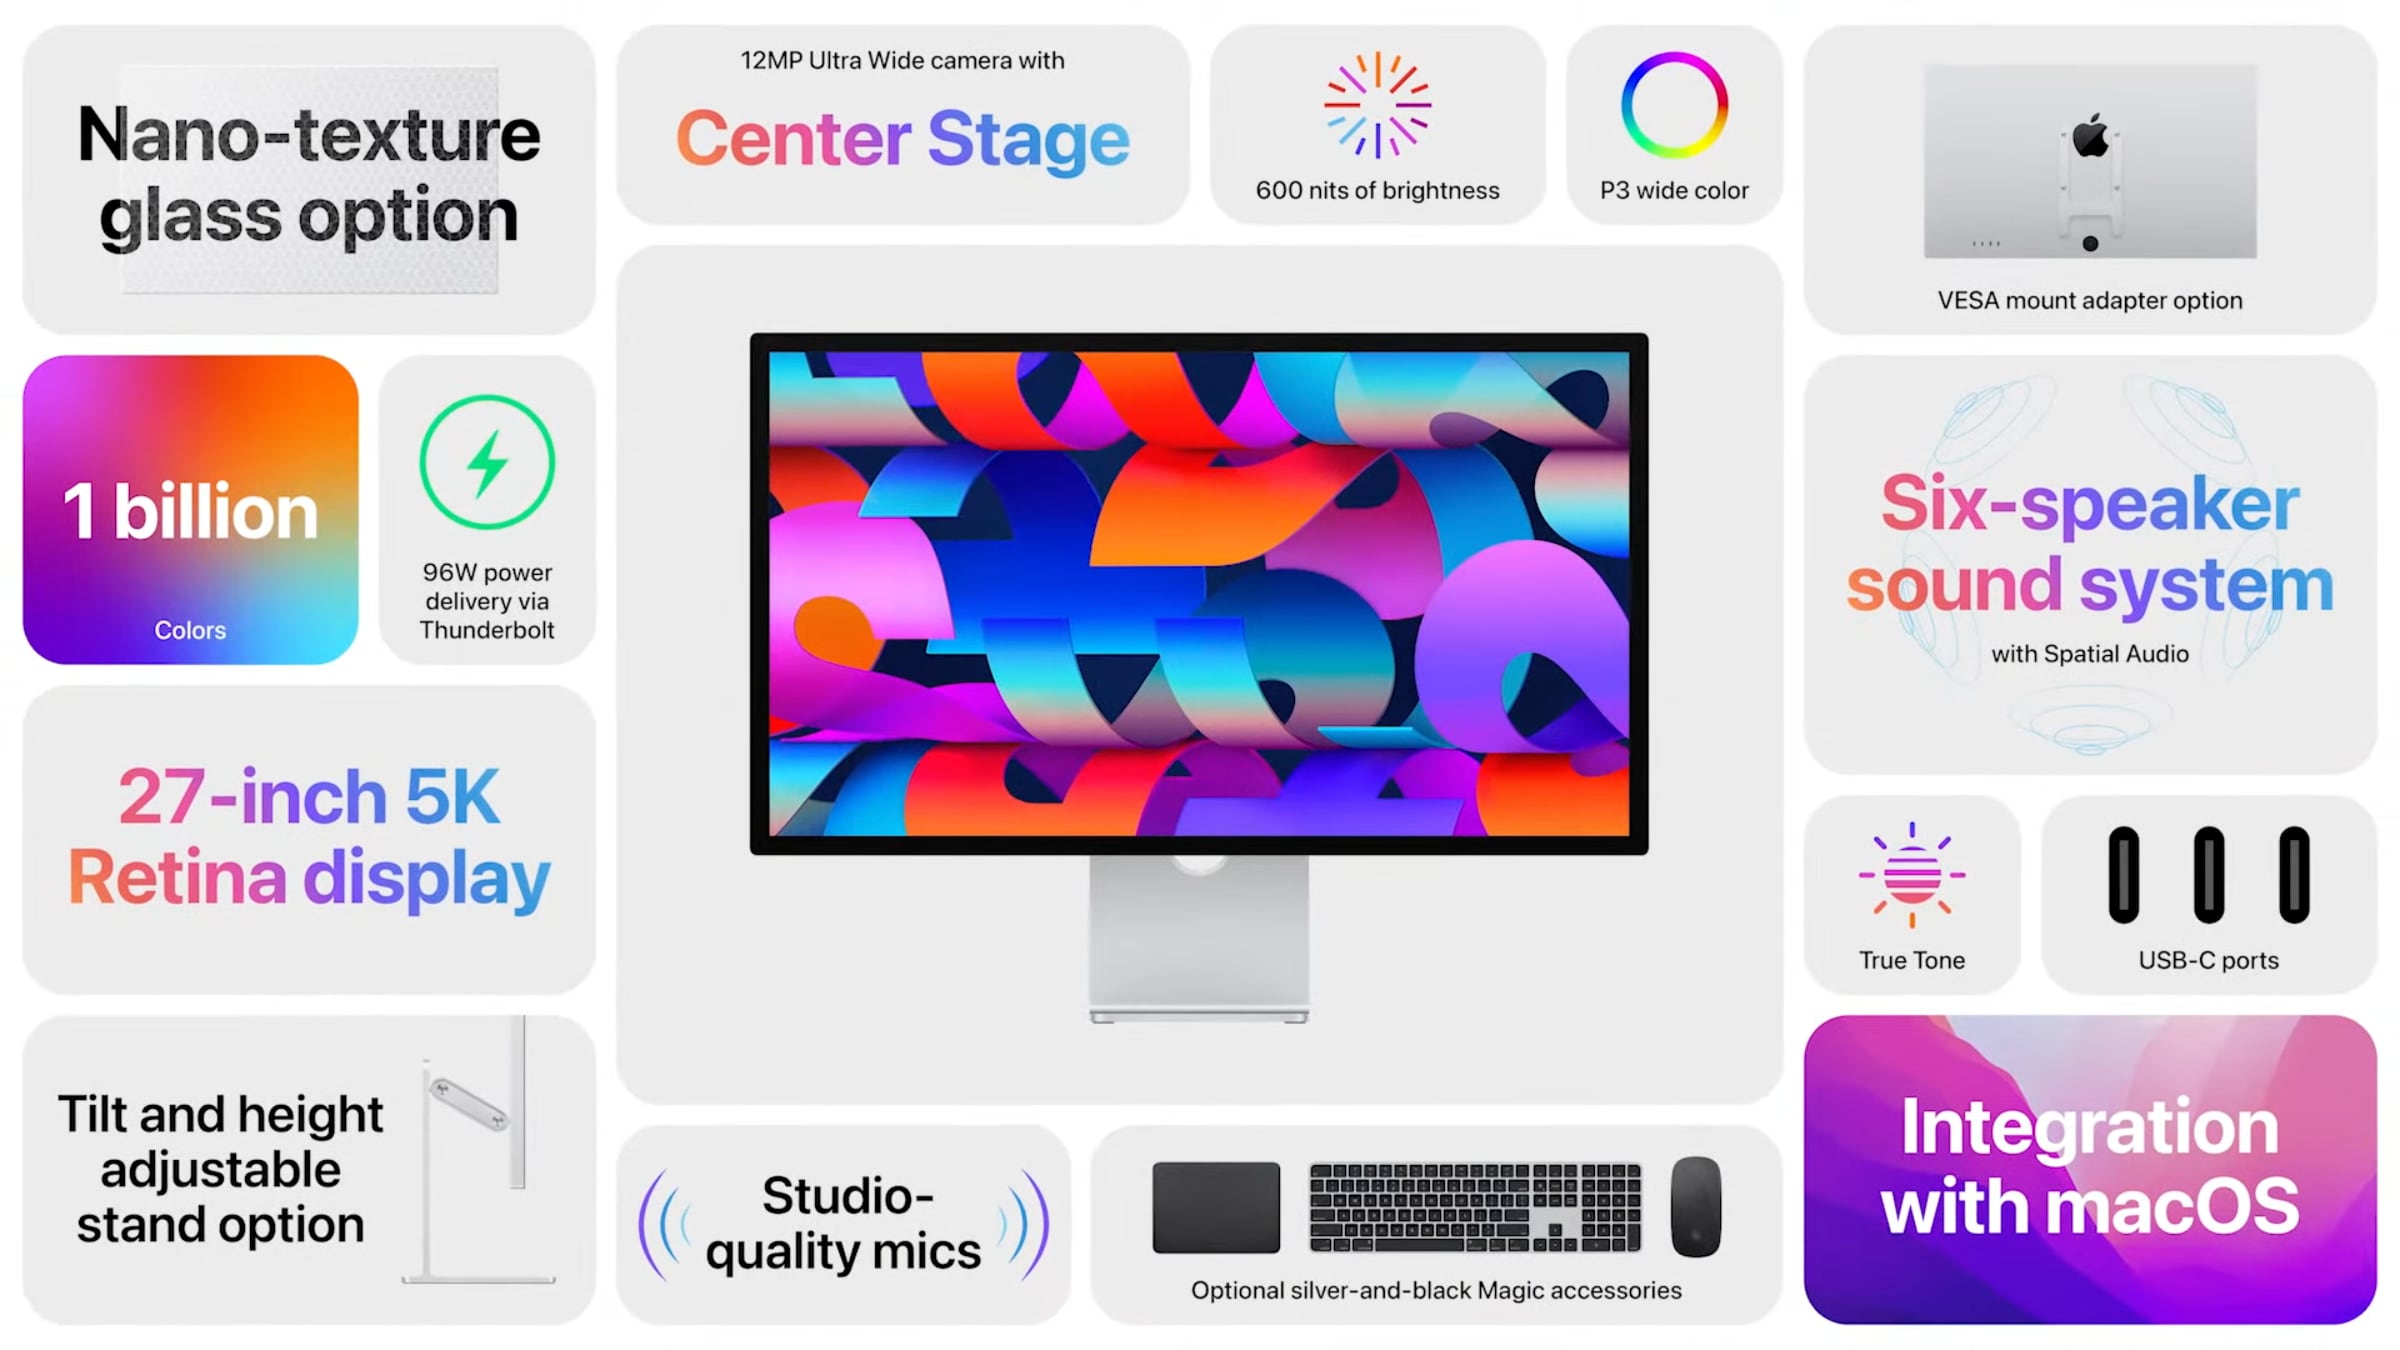 Apple's Studio Display will work with Windows PCs, but with limitations - FlatpanelsHD